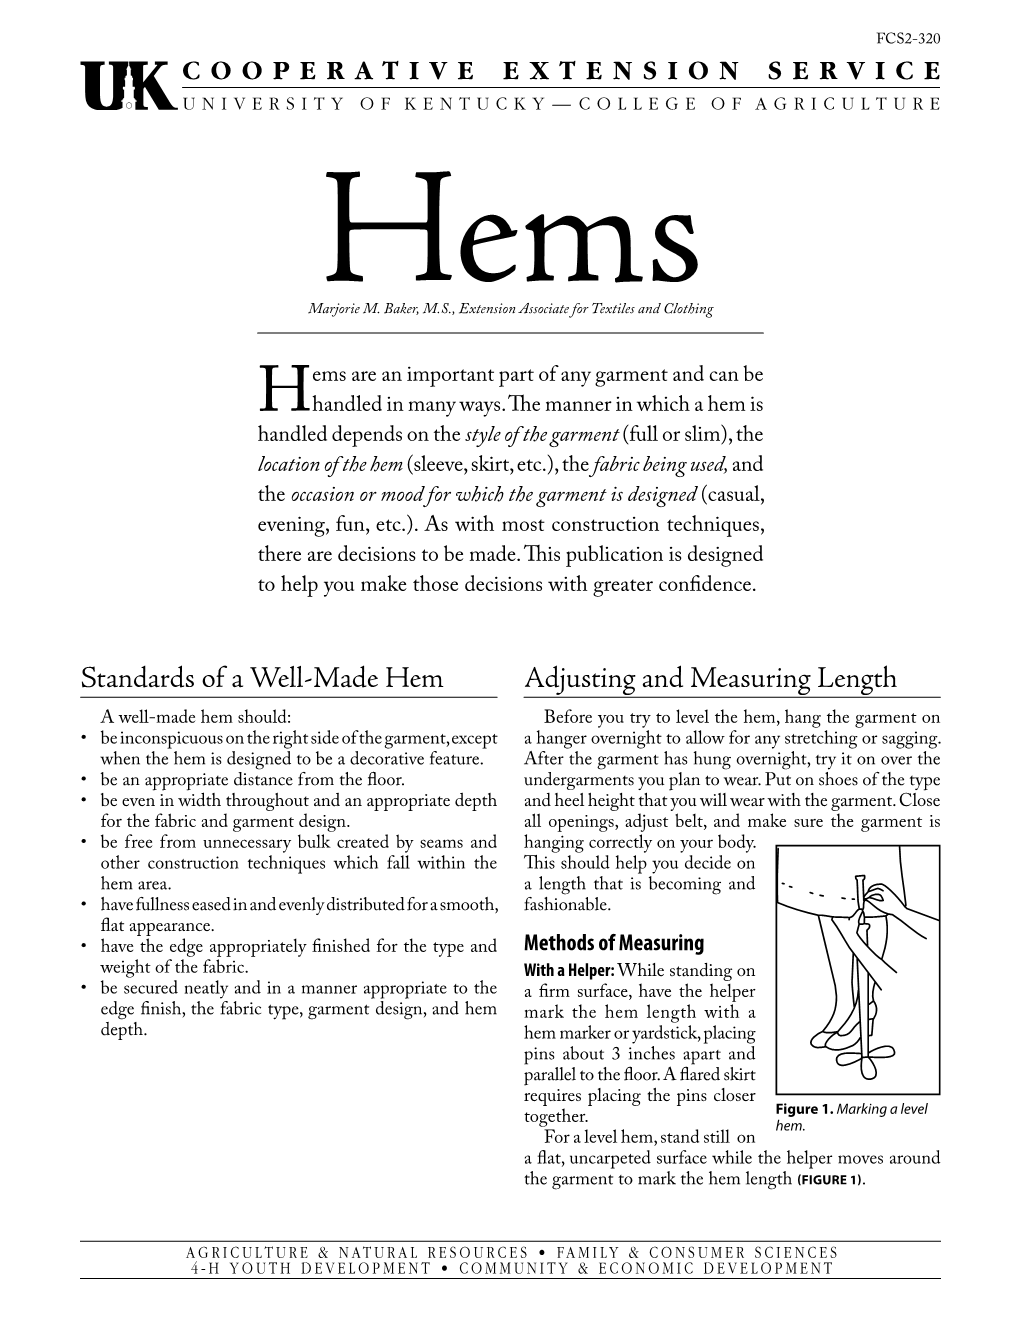 Hems Are an Important Part of Any Garment and Can Be